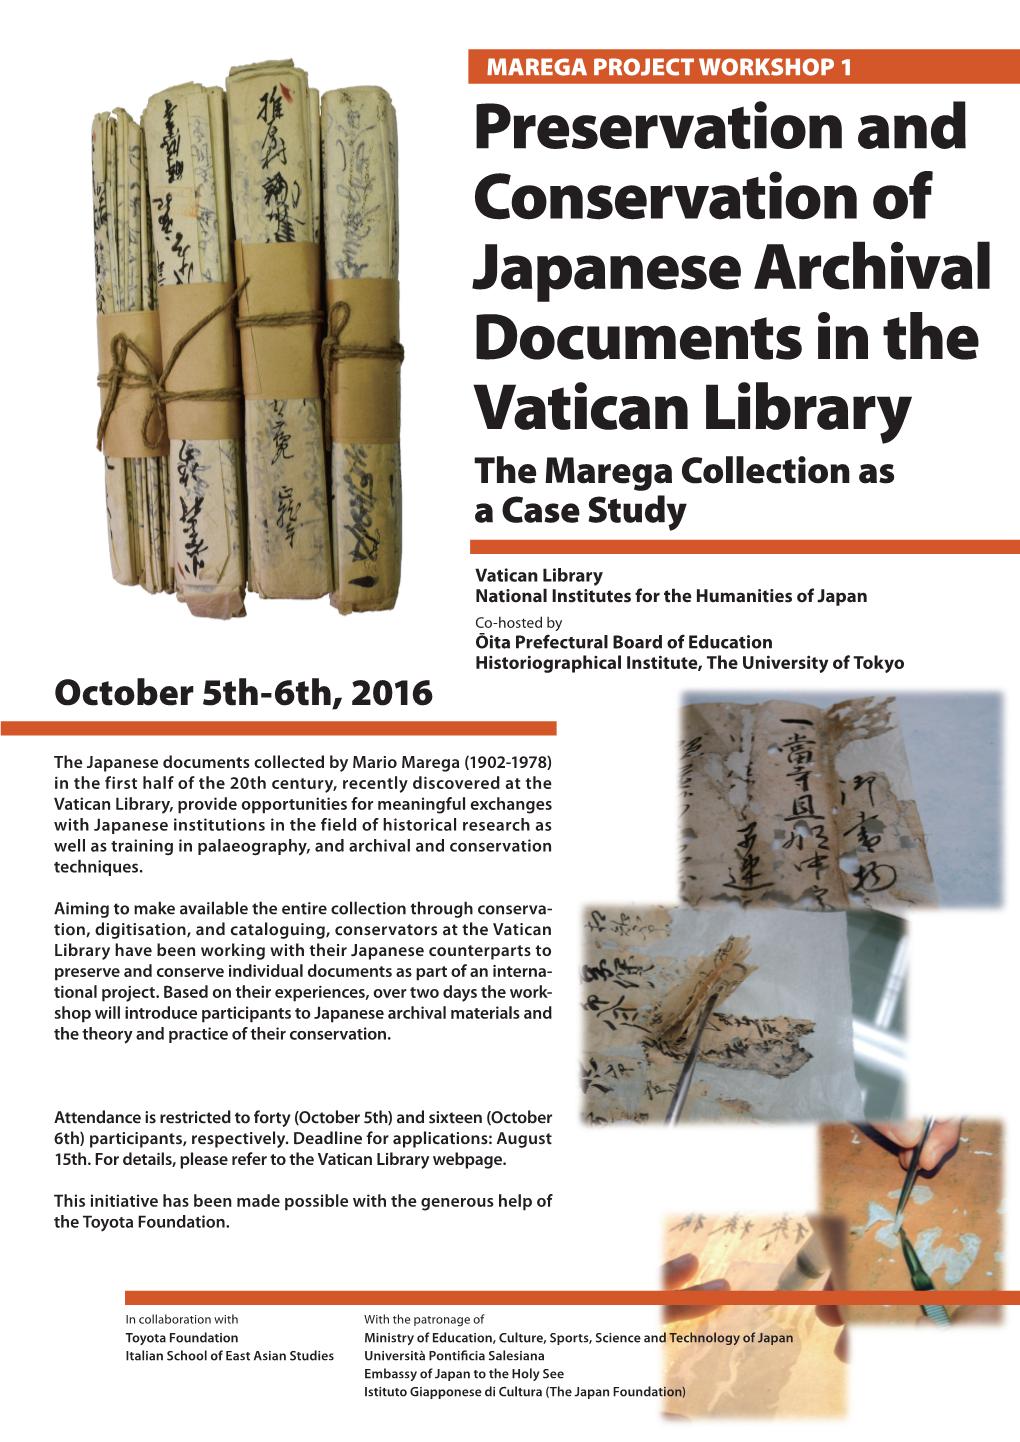 Preservation and Conservation of Japanese Archival Documents in the Vatican Library the Marega Collection As a Case Study